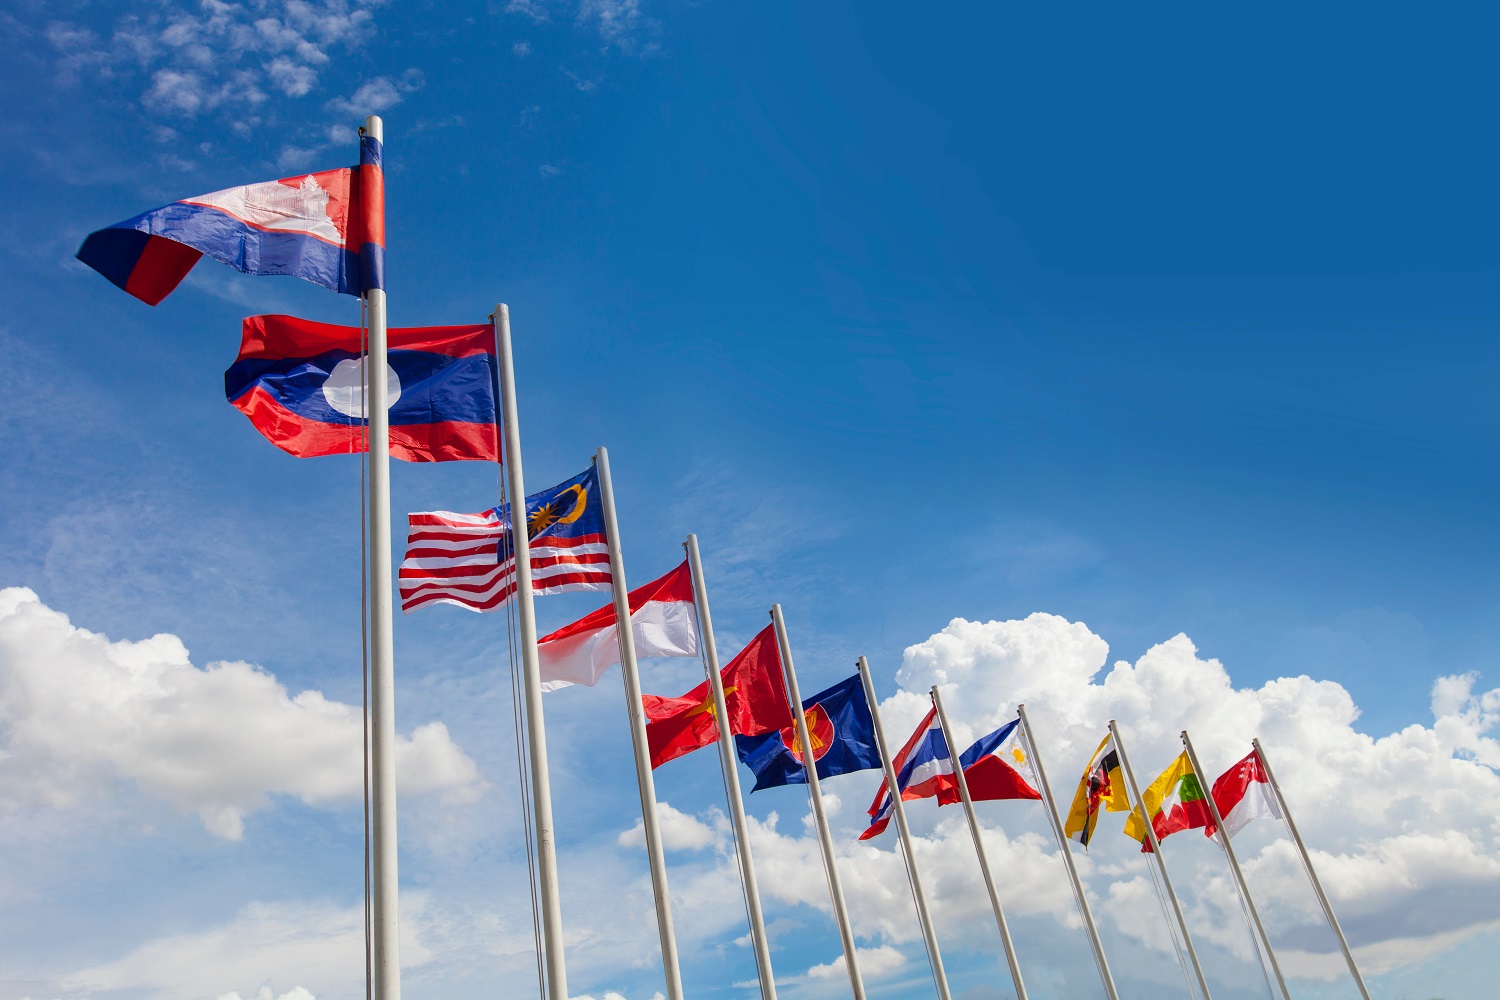 The flags of the ASEAN nations, mounted on flagpoles.